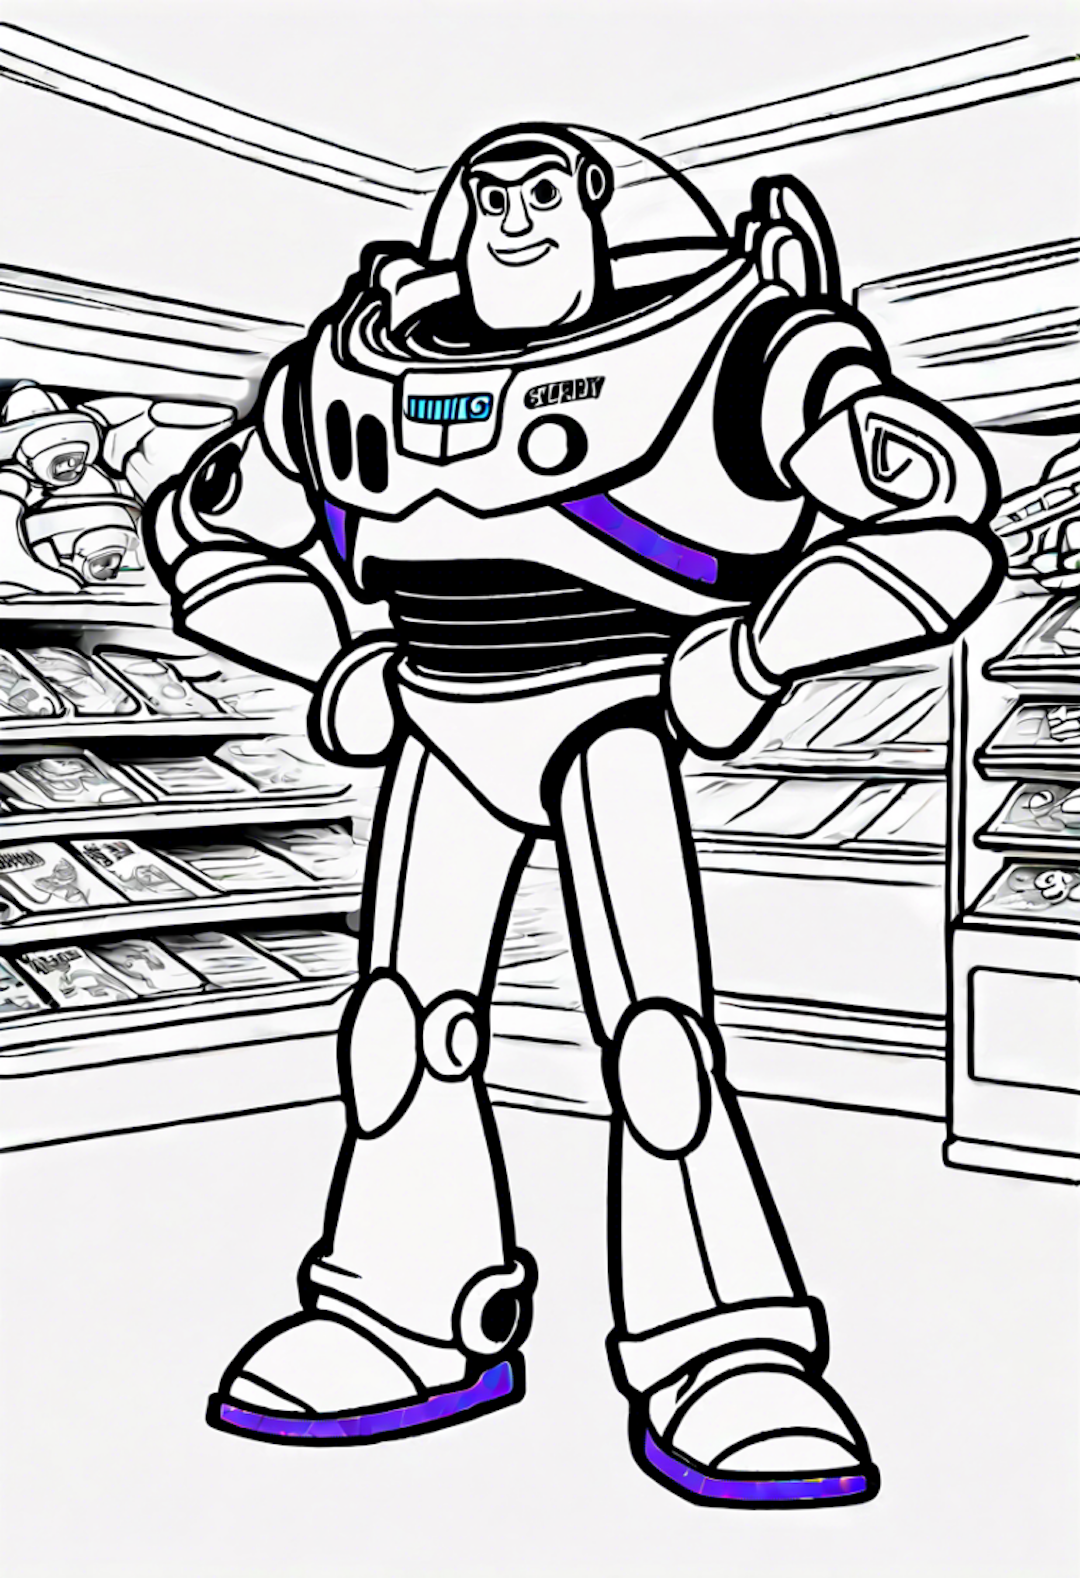 Buzz Lightyear in the Toy Aisle Coloring Page coloring pages